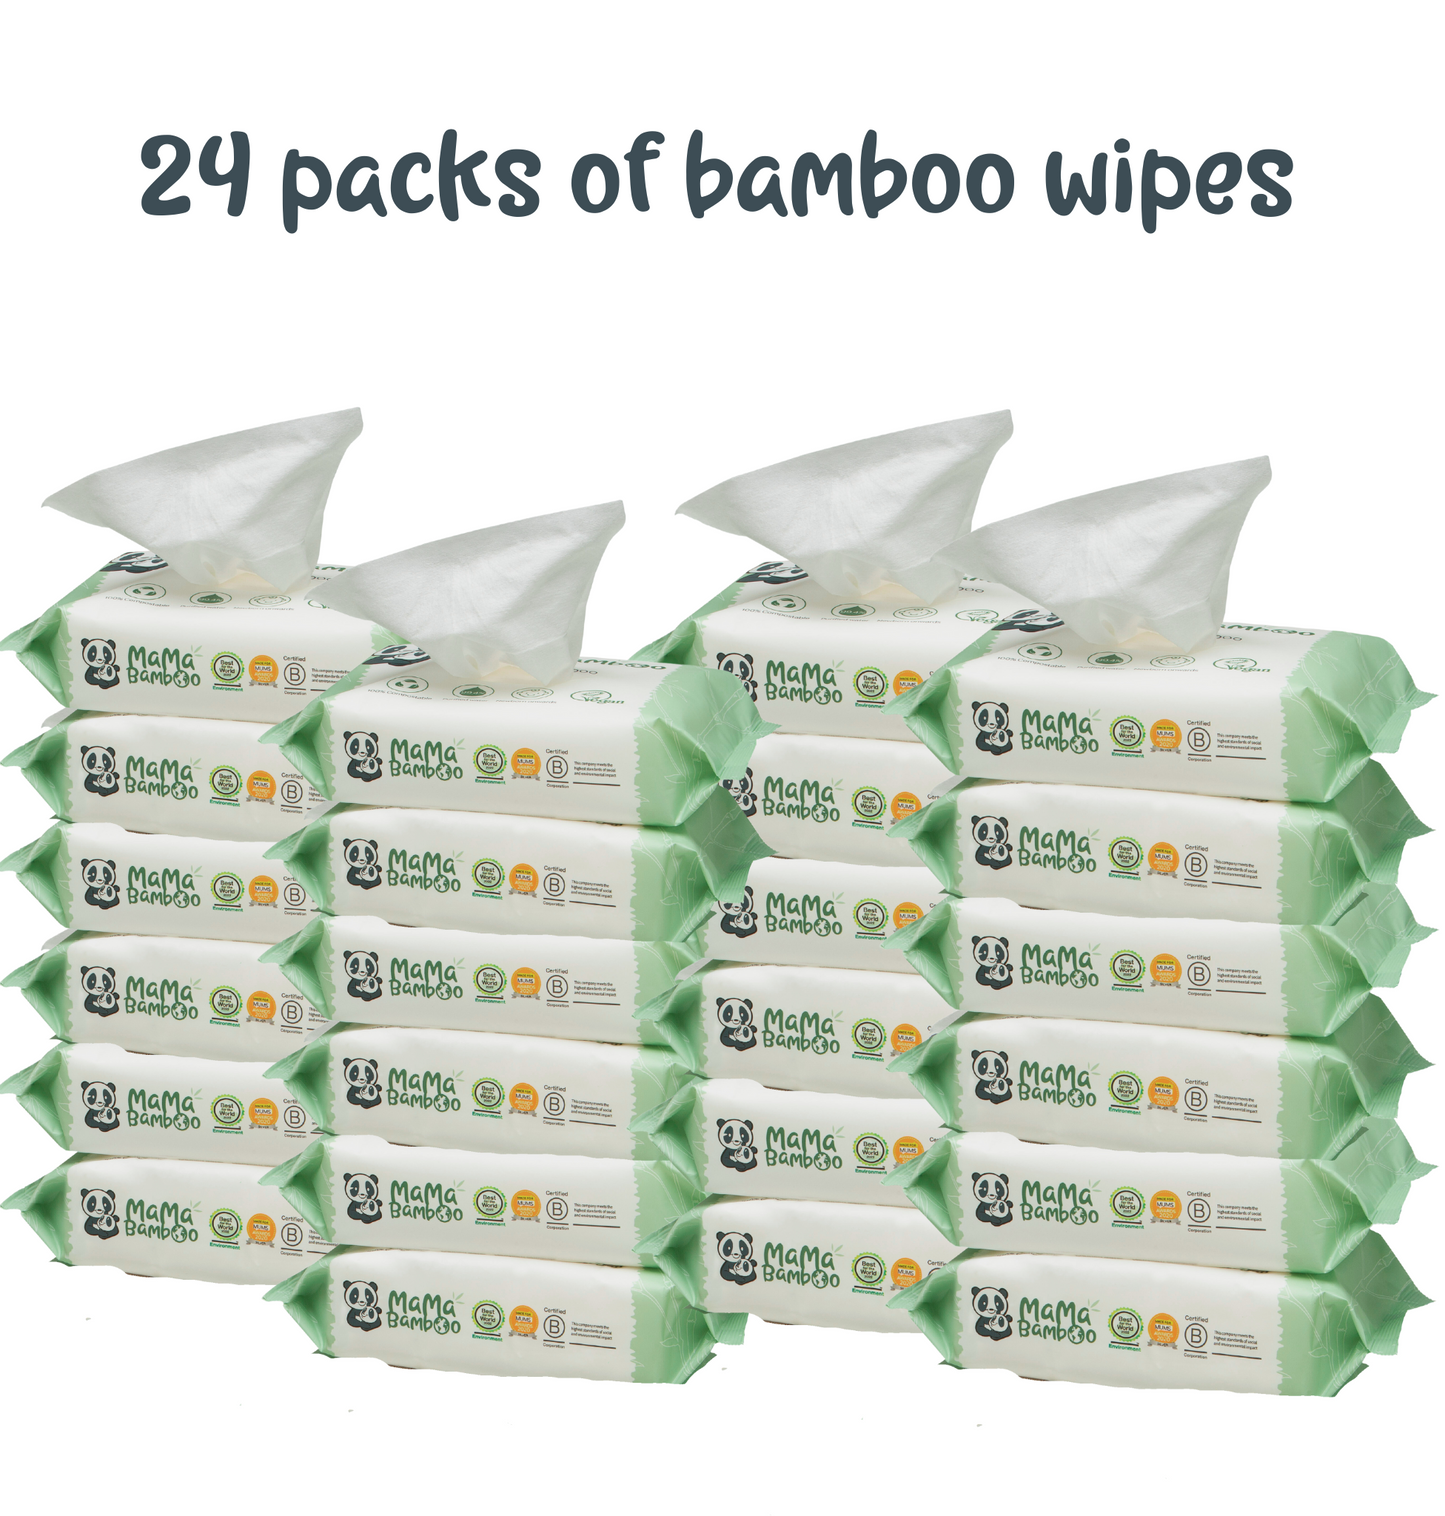 Bamboo Baby Wipes